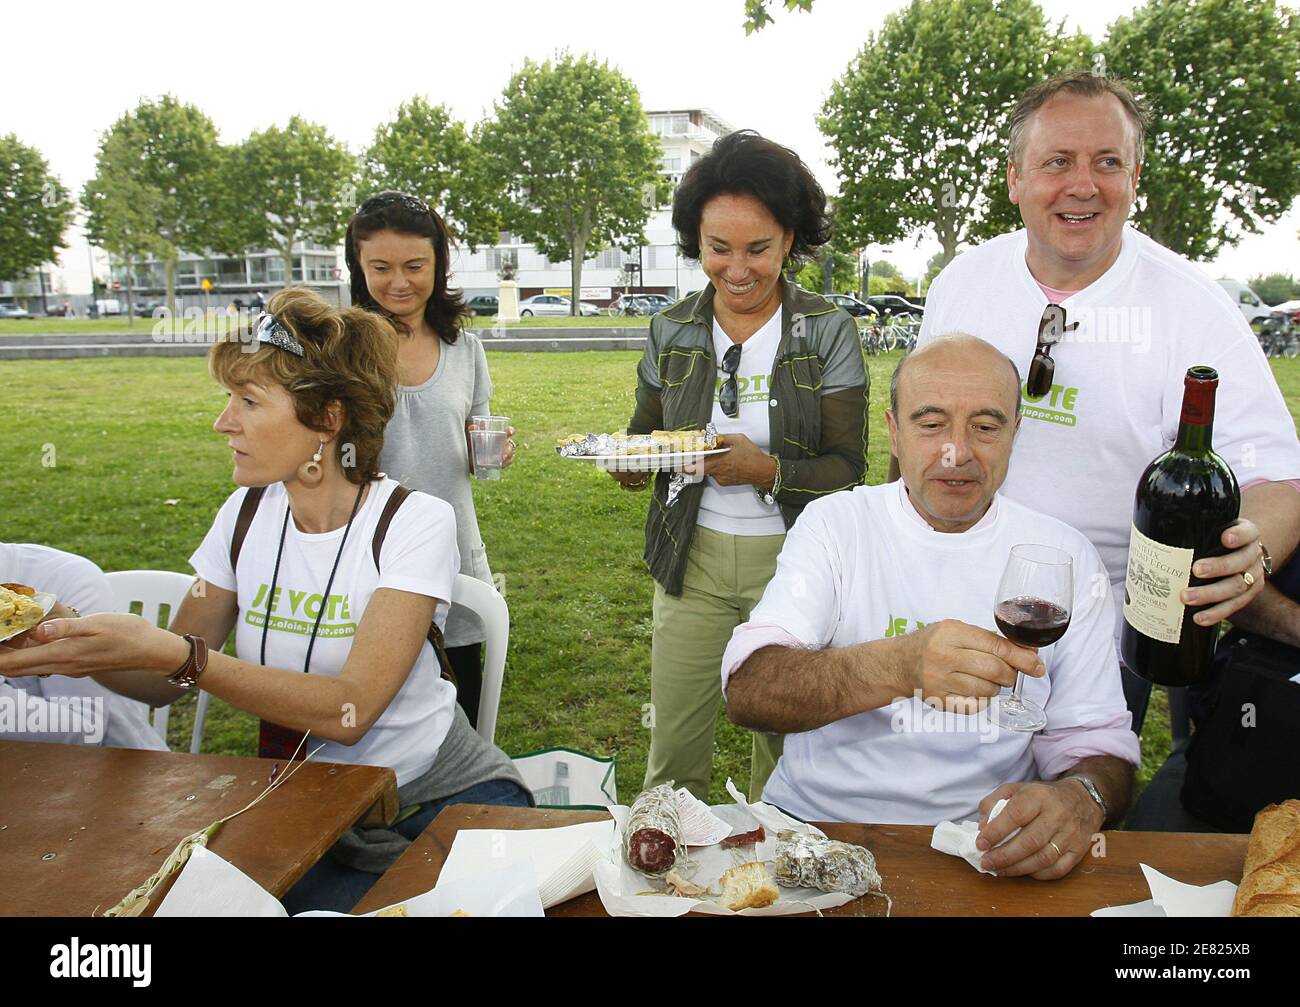 Environment superminister and Bordeaux' mayor Alain Juppe with wife Isabelle campaigns during a picnic in Bordeaux, France on June 3, 2007. Alain Juppe campaigns as UMP candidate for the upcoming parliamentary elections. Photo by Patrick Bernard/ABACAPRESS.COM Stock Photo